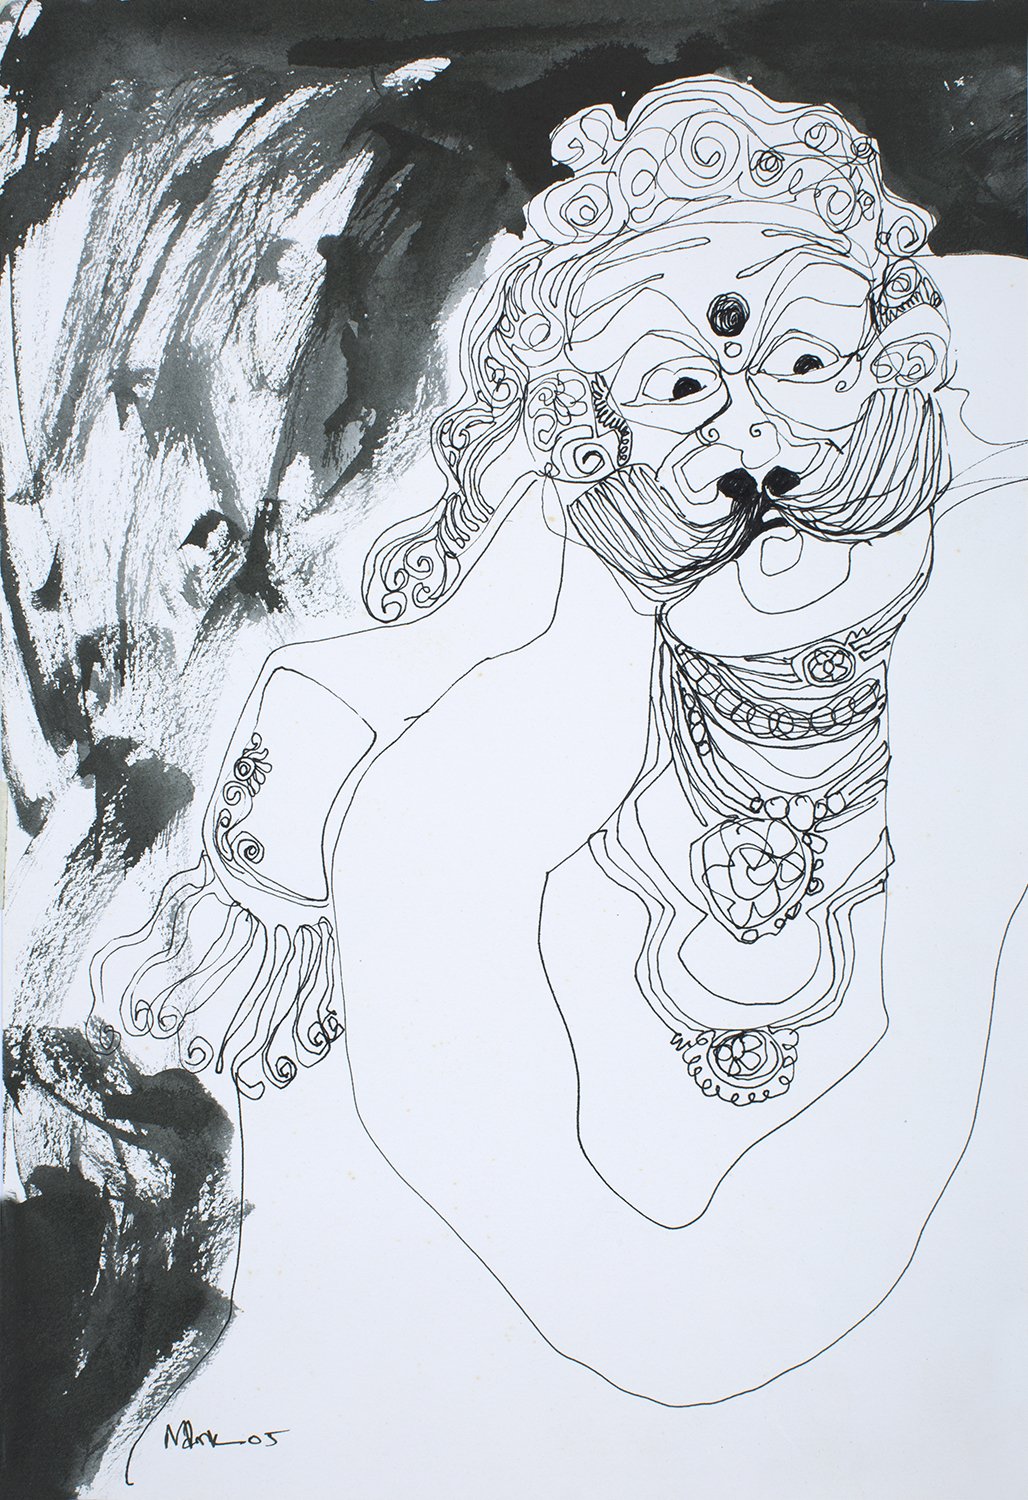 Performer 341|S. Mark Rathinaraj- Pen and Ink on Paper, , 14 x 9.5 inches